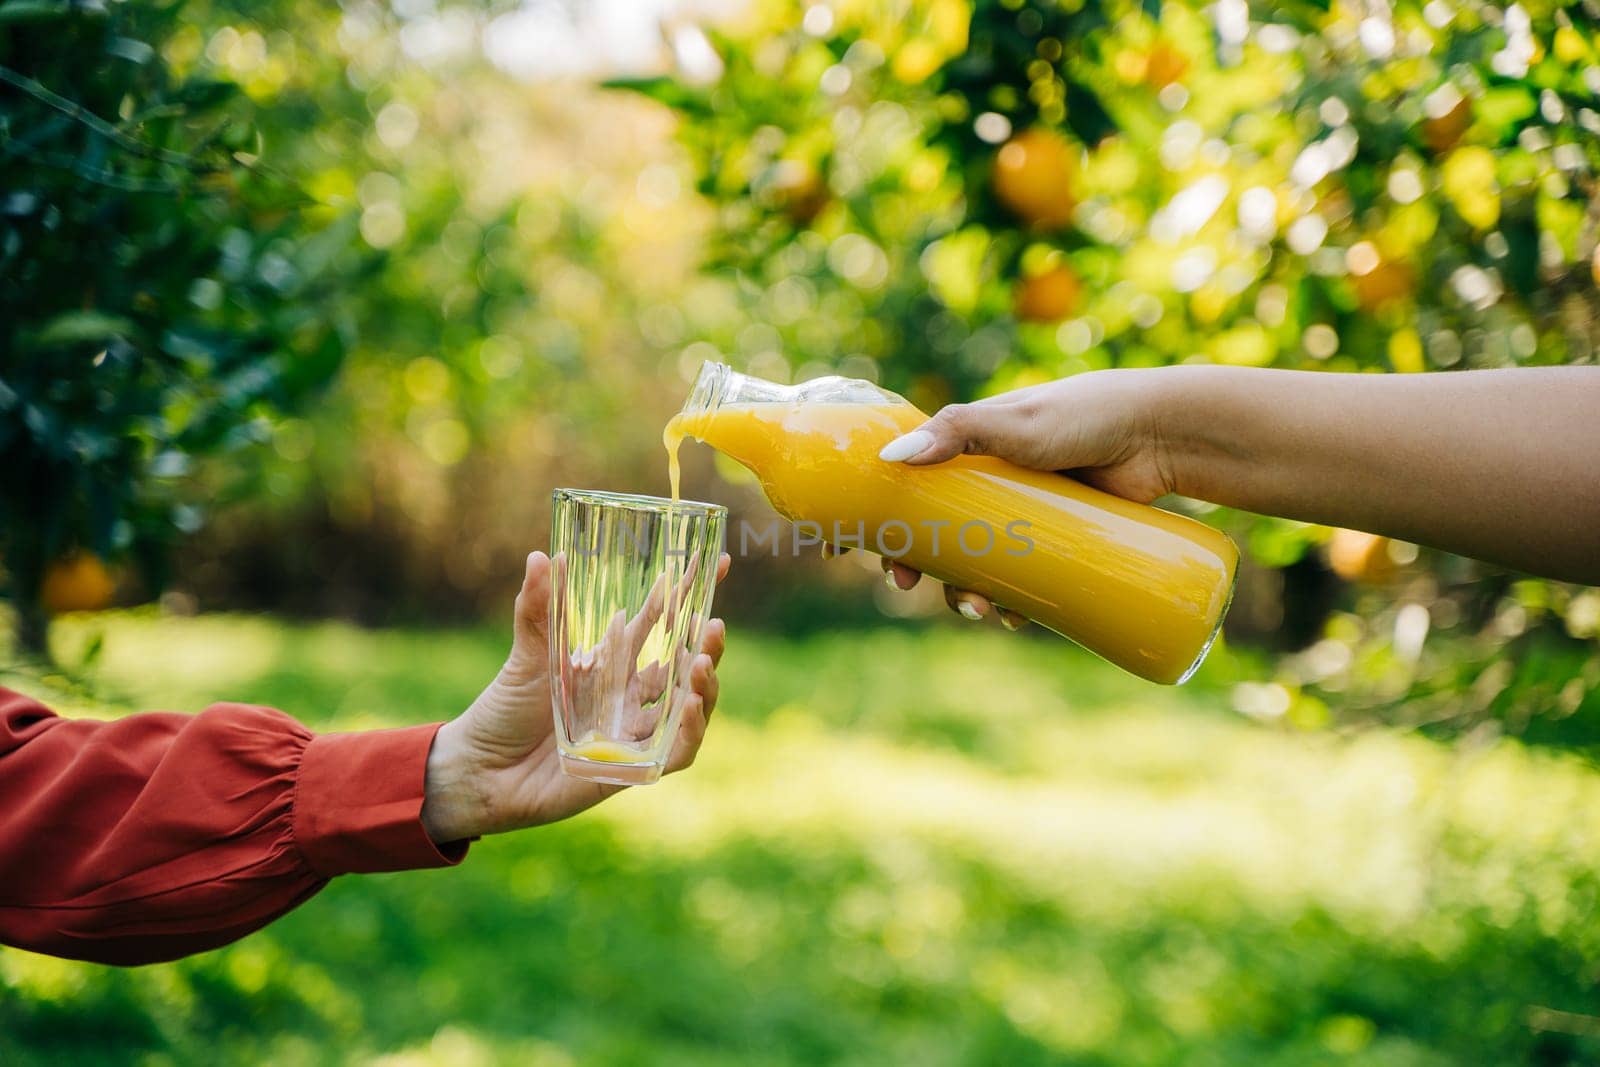 Mother's female hand pours fresh organic orange citrus juice lemonade into glass, that child's hand is holding with the orangery orchard fruit garden trees in the background